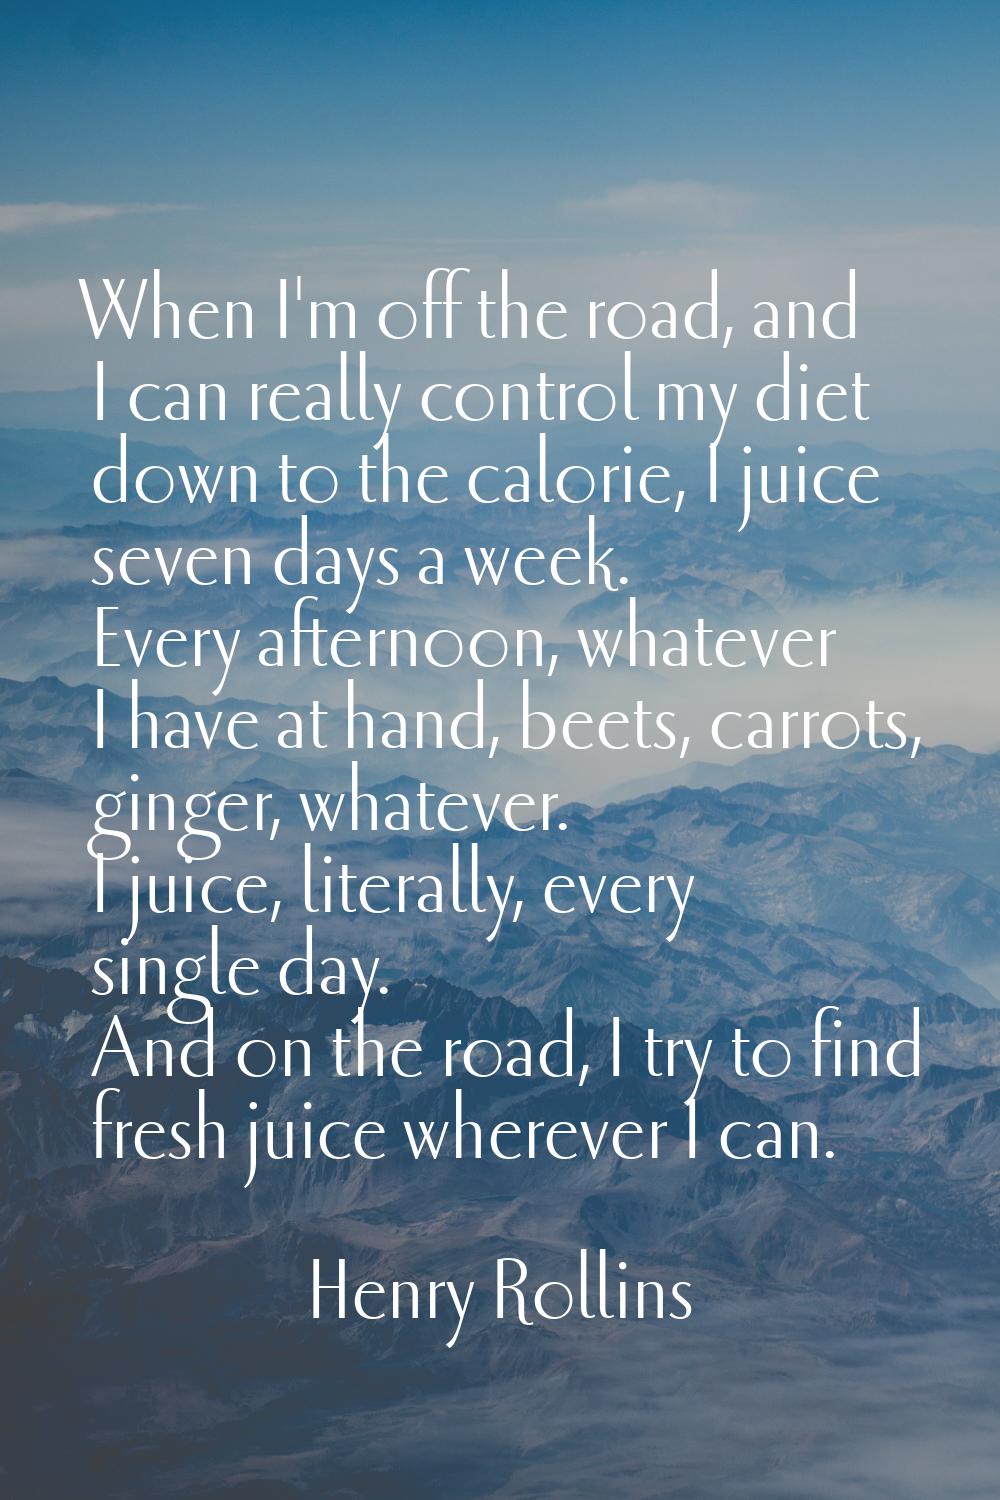 When I'm off the road, and I can really control my diet down to the calorie, I juice seven days a w